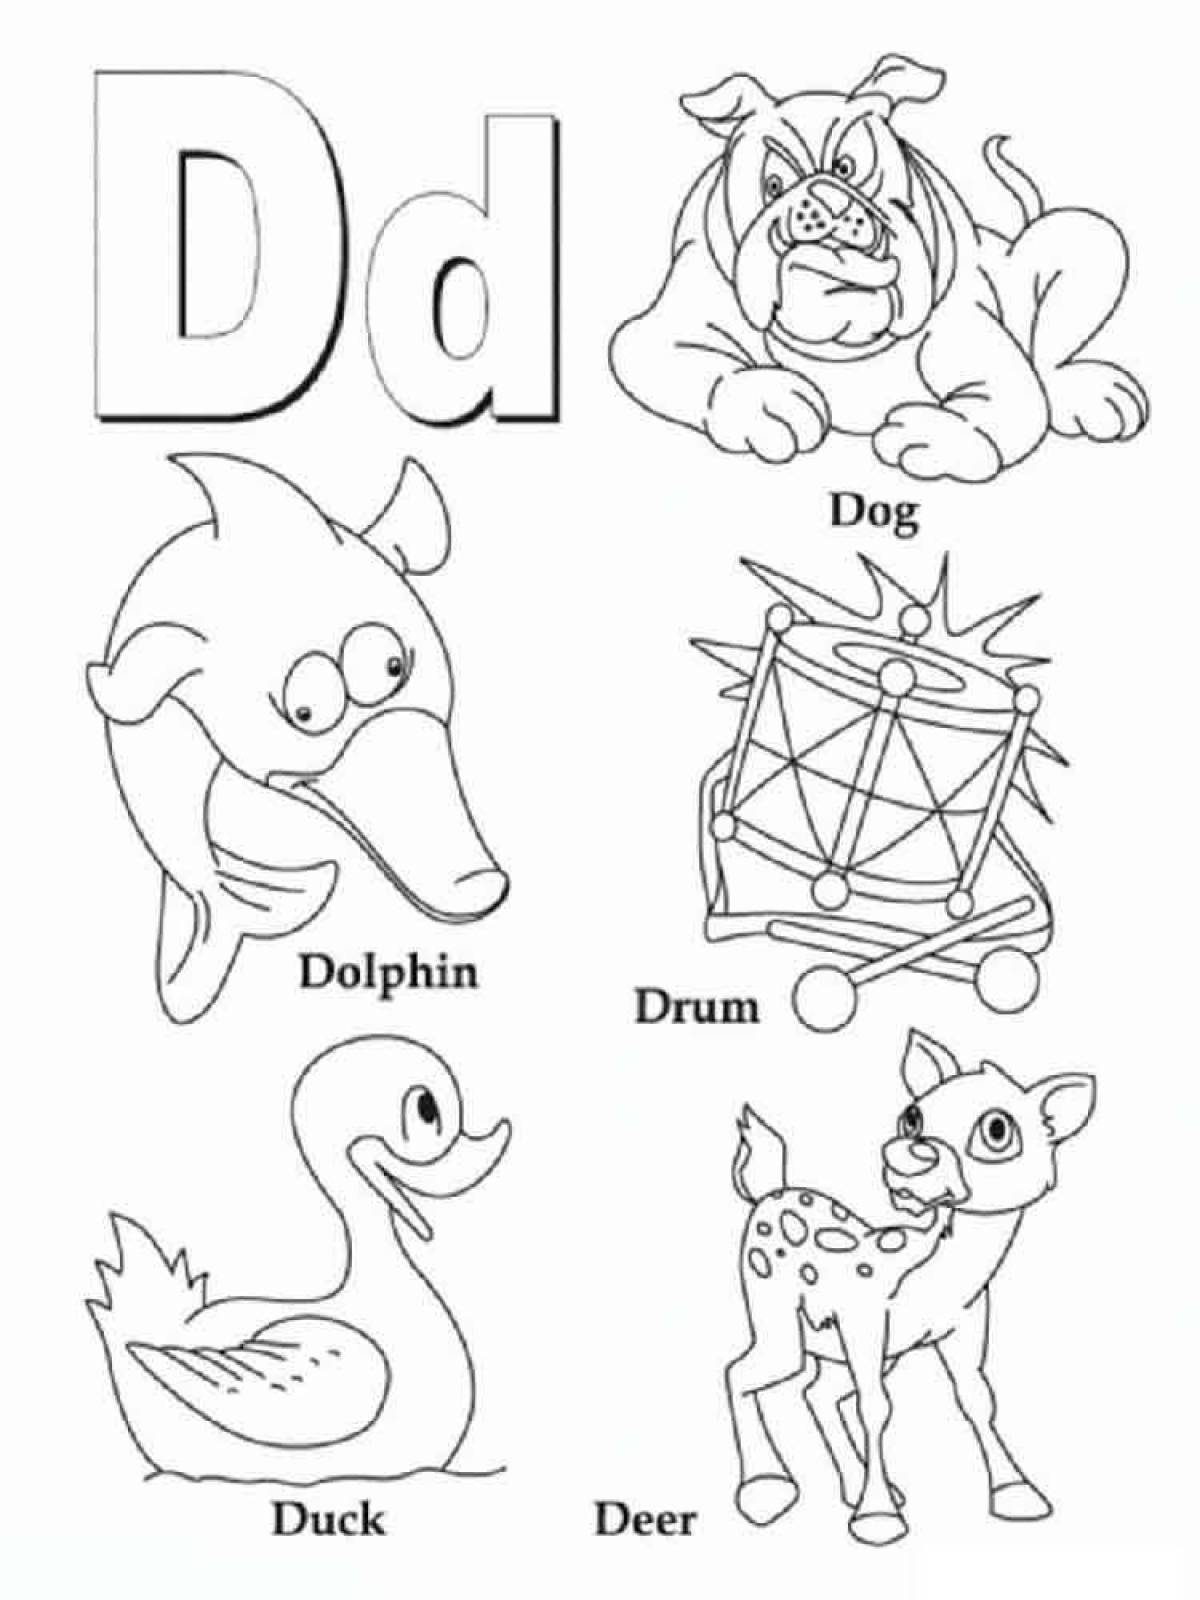 Colorful english alphabet coloring page for kids of all ages